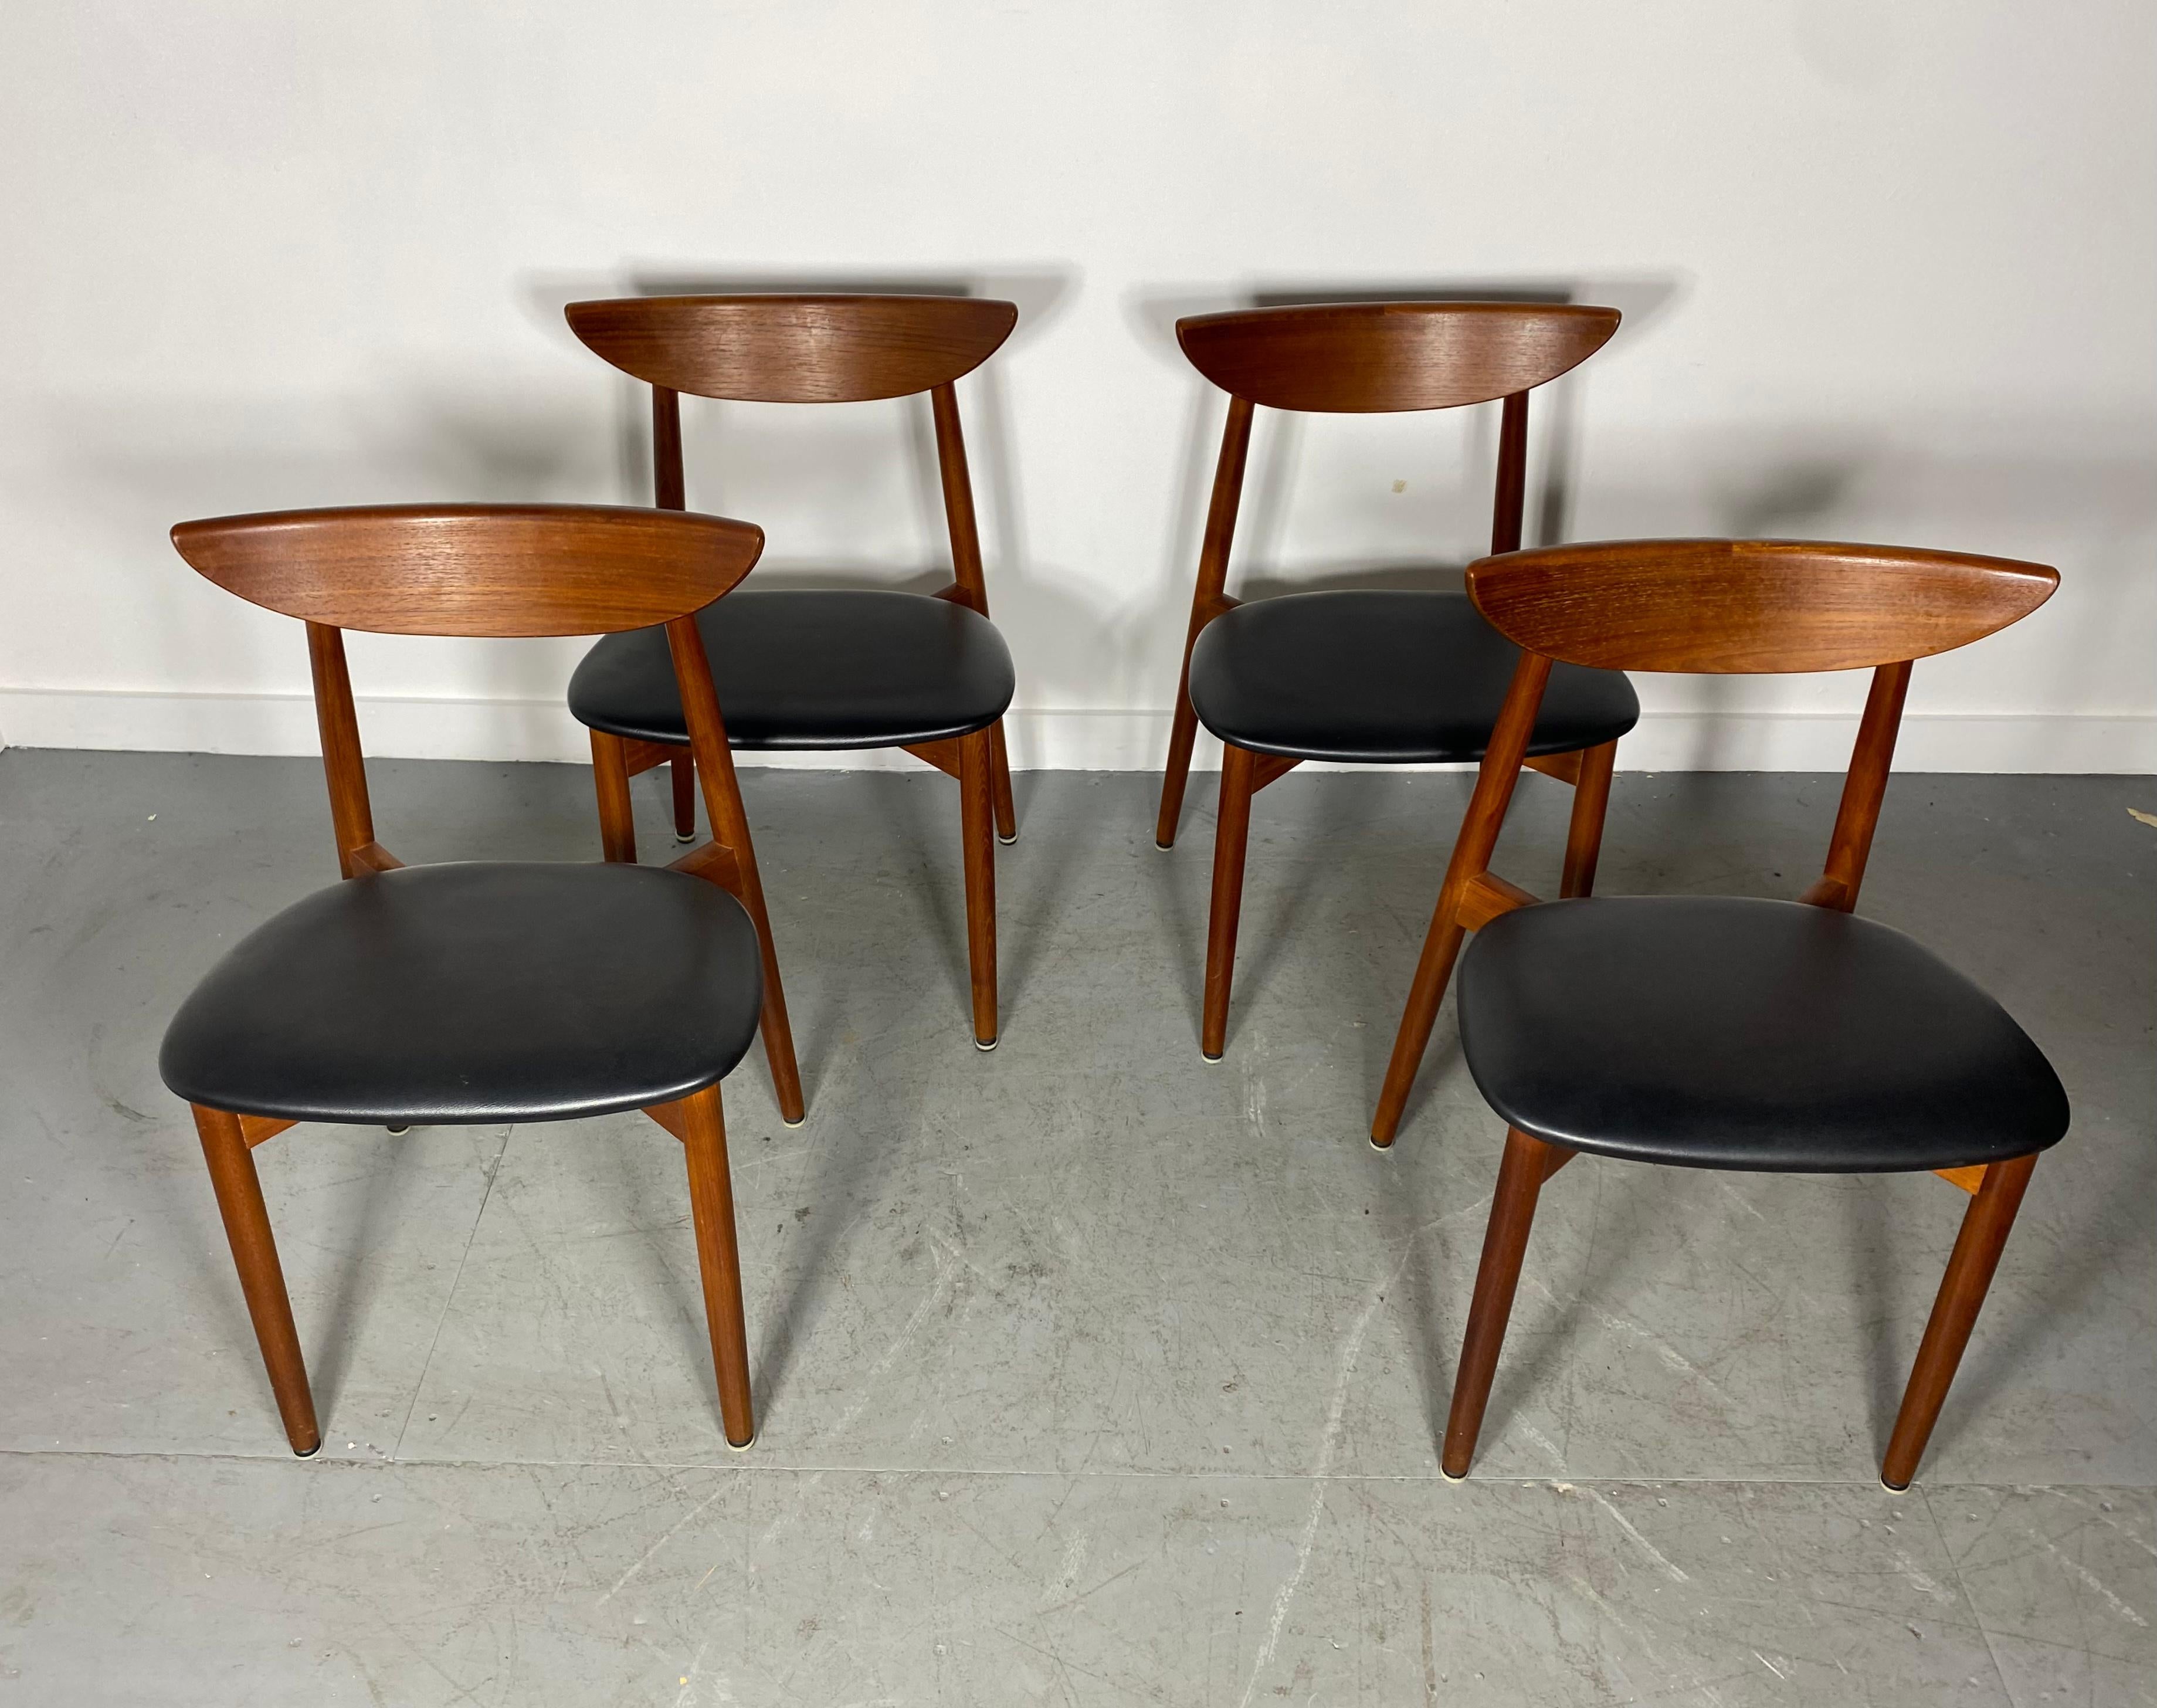 beautiful and sleek set 4 dining chairs designed by Harry Ostergaard in teak wood. Featuring graceful lines with a rounded curved back similar to Hans Wegner and Finn Juhl. These chairs and very comfortable with plenty of width and depth to the